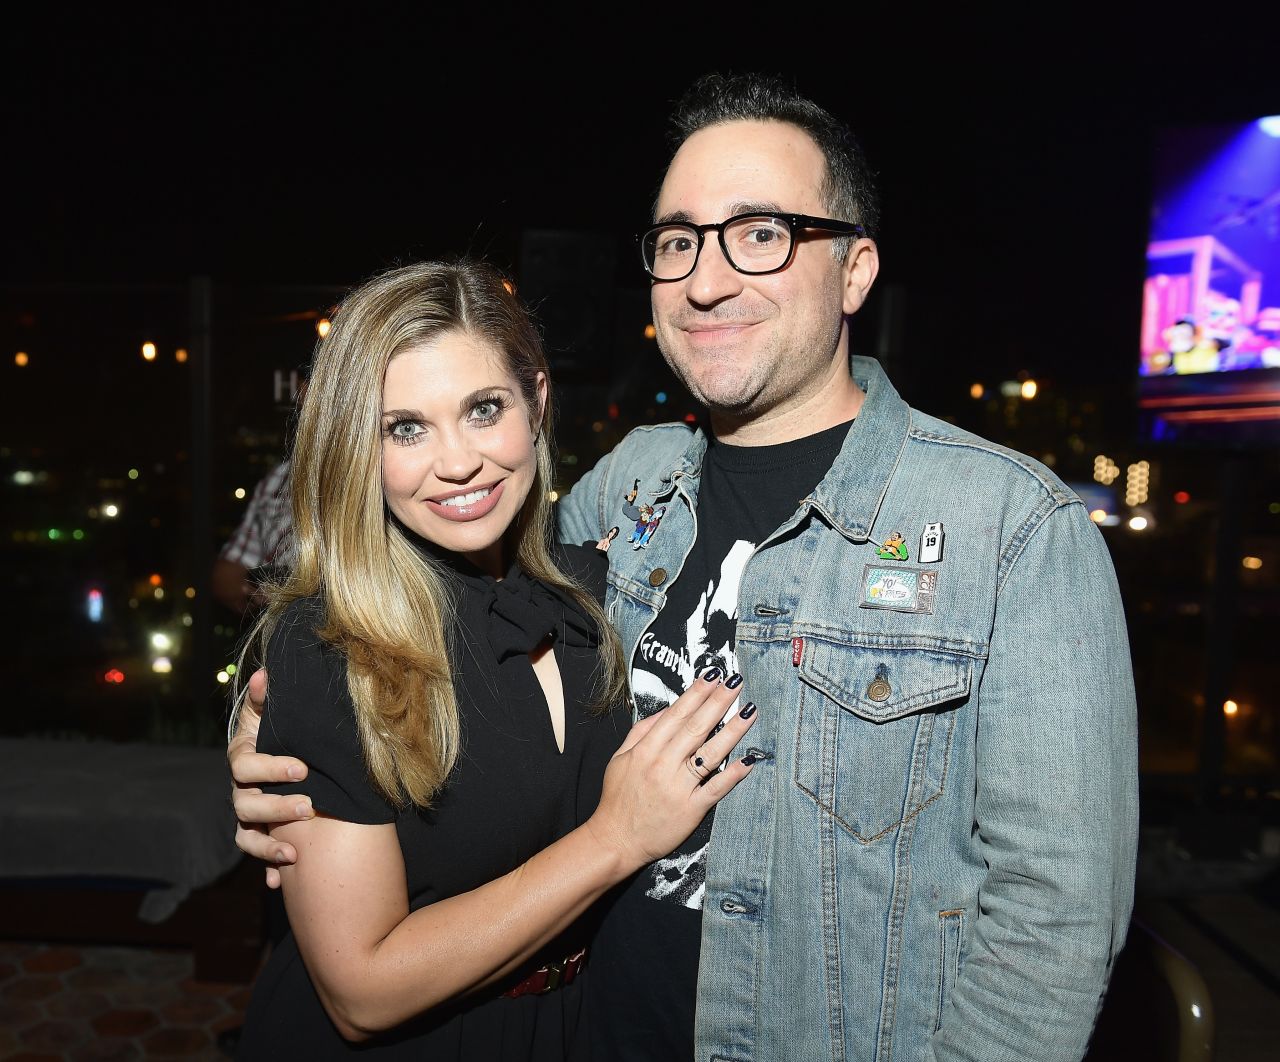 "Boy Meets World/Girl Meets World" star Danielle Fishel and her executive producer husband Jensen Karp each announced <a href="https://www.instagram.com/p/BsI5X3pFGwO/" target="_blank" target="_blank">on their Instagram accounts </a>in January that they are expecting their first child, a boy, in July 2019.  Son Adler Lawrence was born four weeks early.